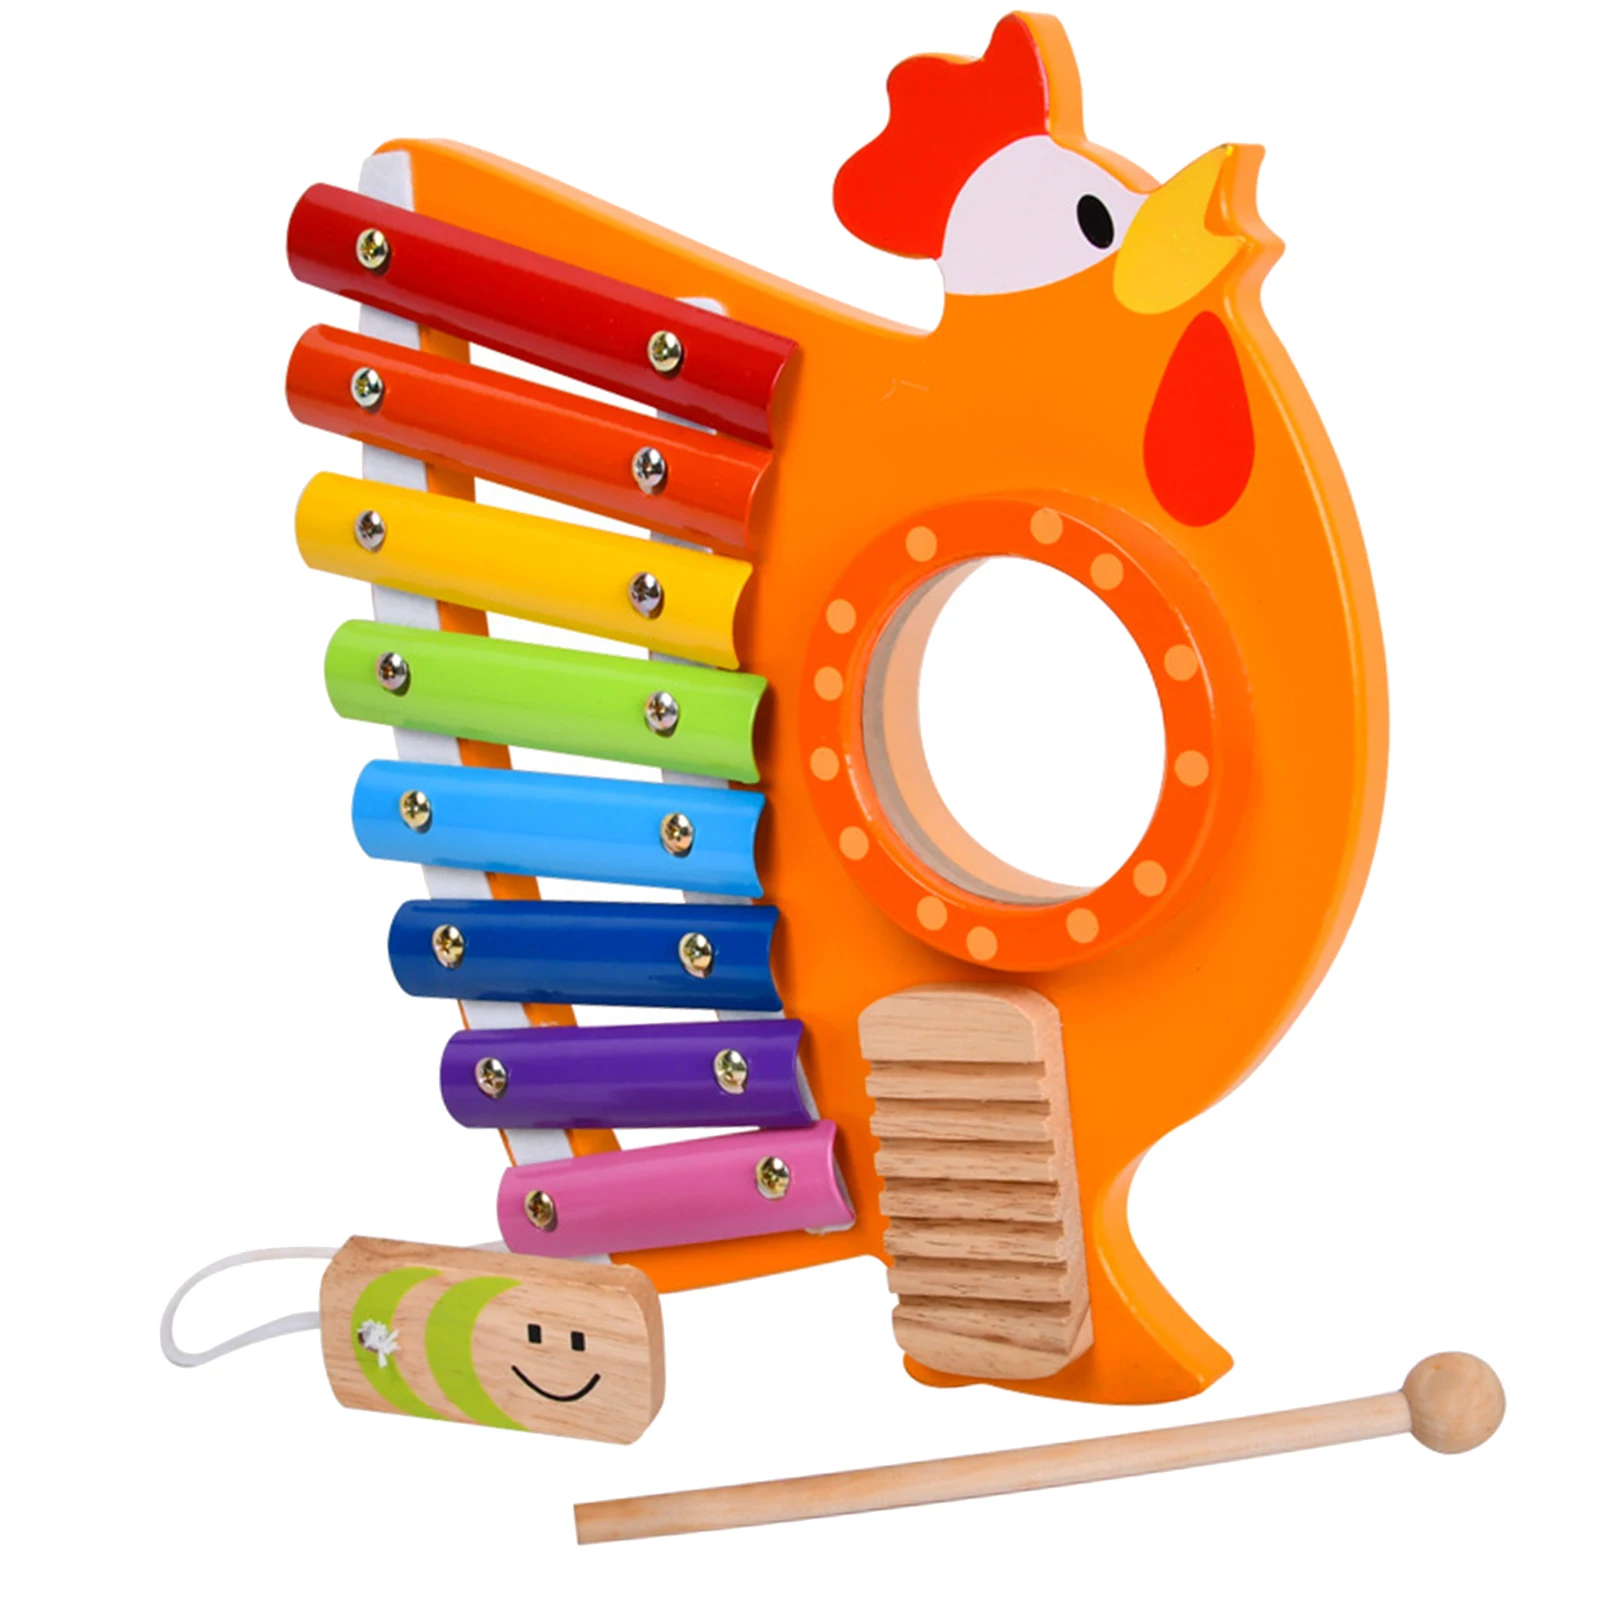 3-in-1 8 Note Xylophone Mallet Wood Percussion Rhythm Instrument Piano Glockenspiel Educational Learning Training Musical Toys